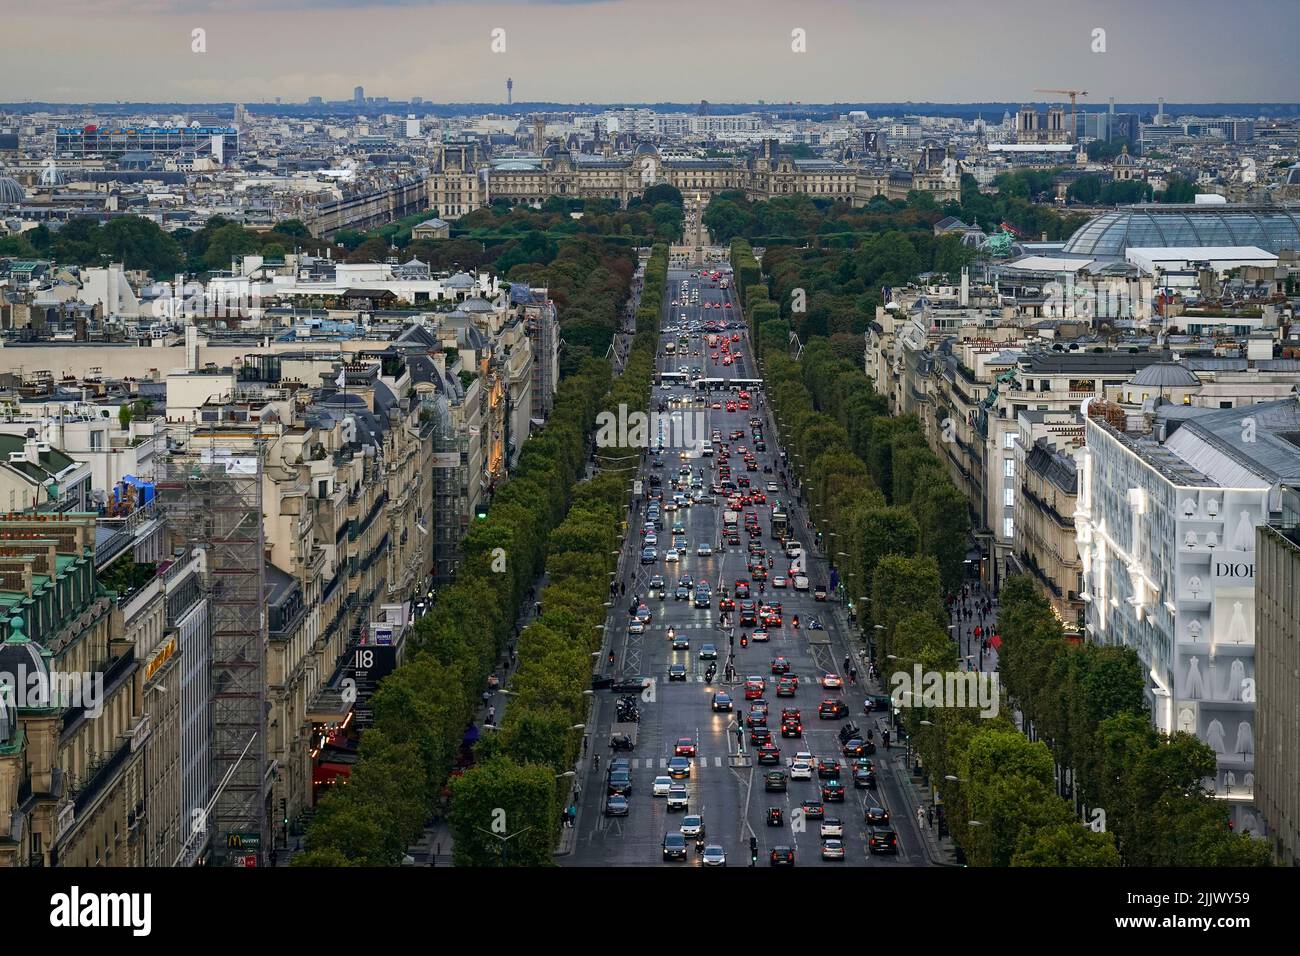 France, Paris, The Avenue des Champs-Elysees is an avenue in the 8th arrondissement, running between the Place de la Concorde in the east and the Plac Stock Photo